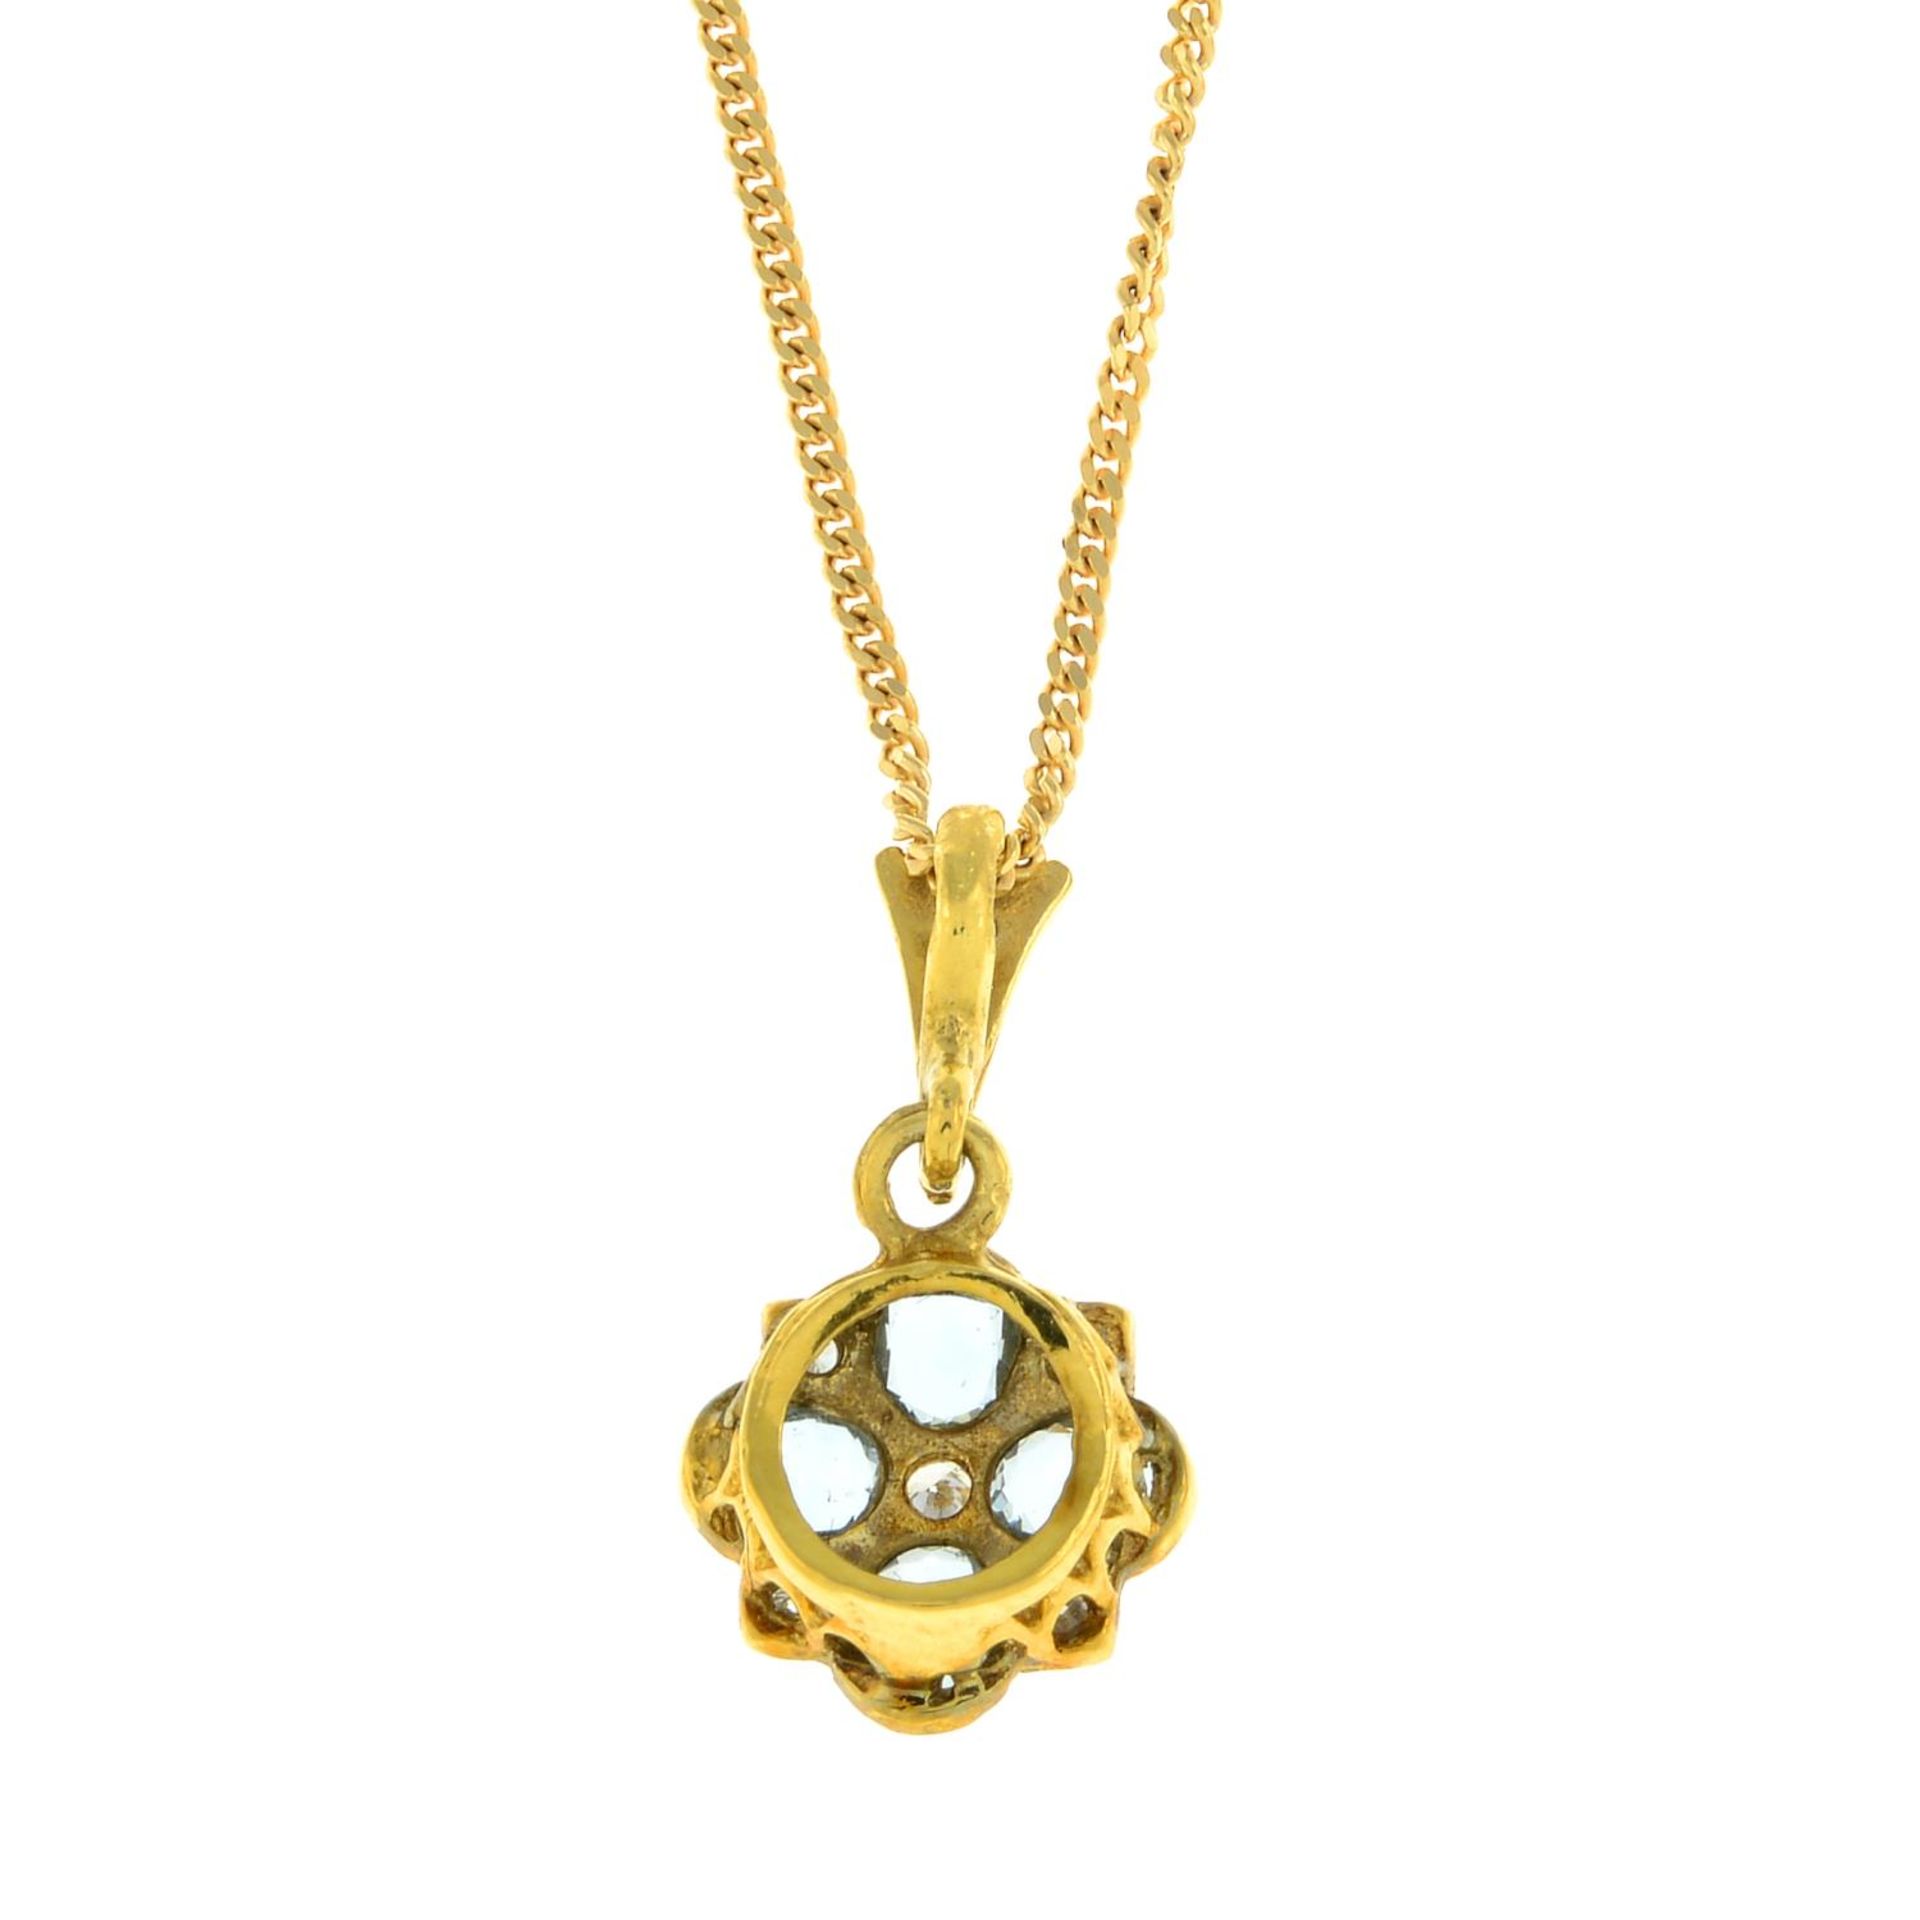 A 9ct gold aquamarine and diamond floral pendant, with 9ct gold chain.Hallmarks for 9ct gold. - Image 2 of 3